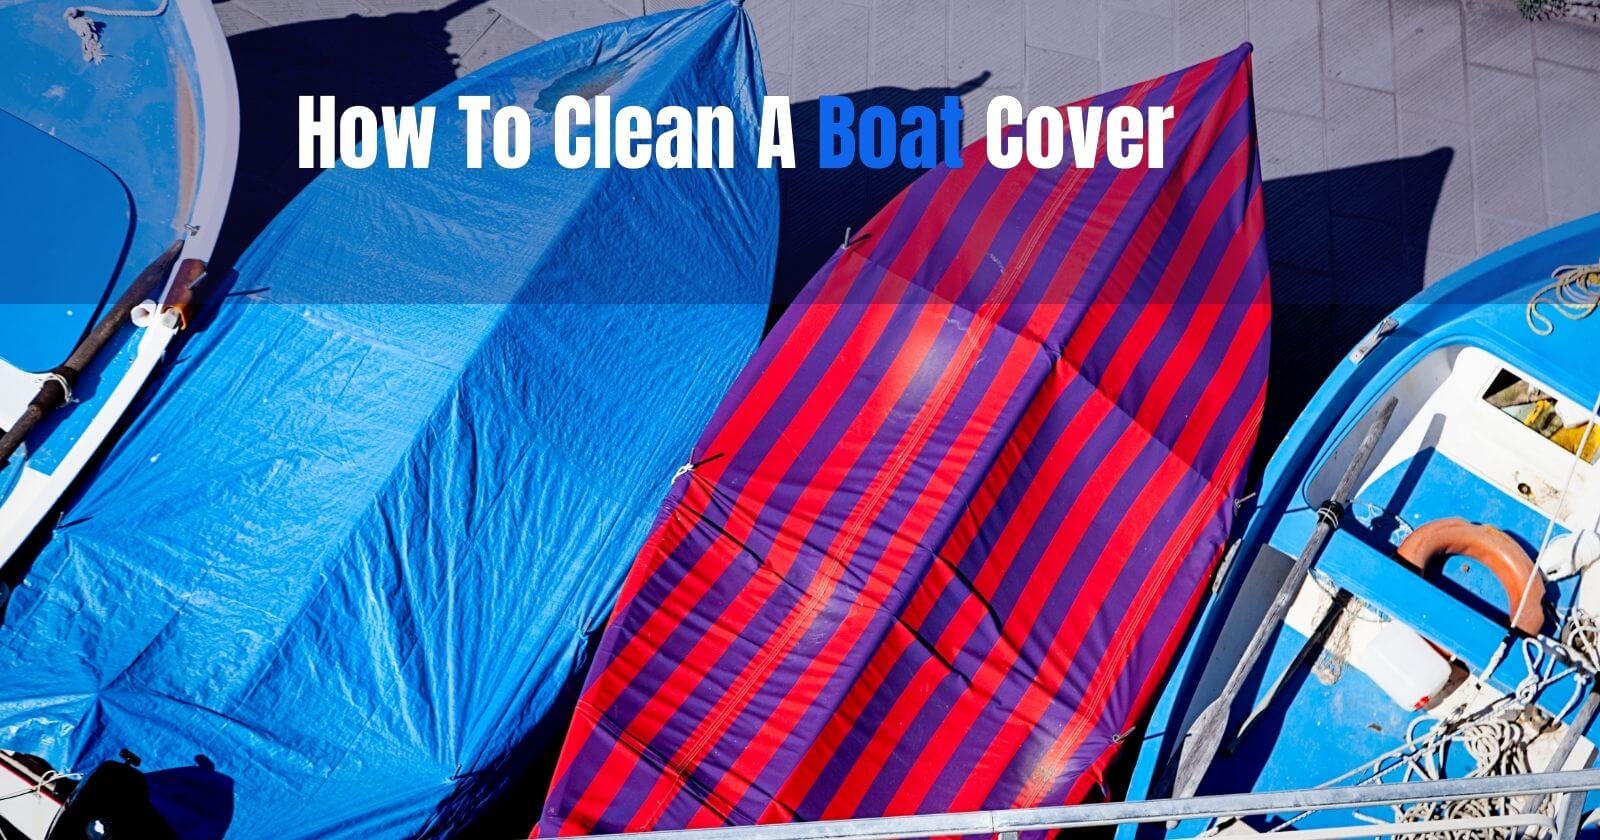 How to clean a boat cover